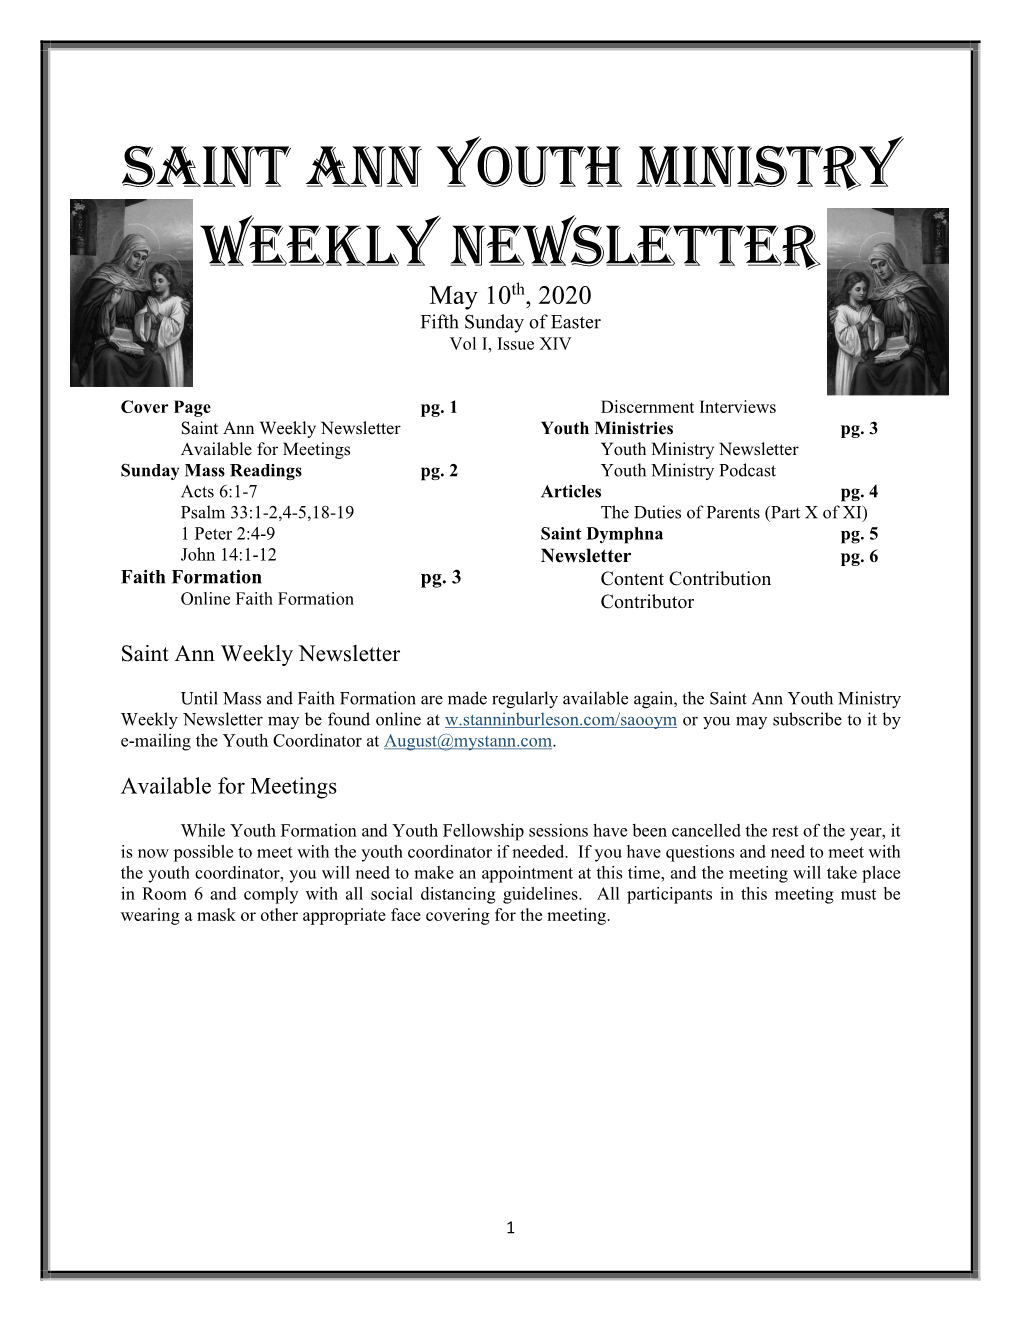 Saint Ann Youth Ministry Weekly Newsletter May 10Th, 2020 Fifth Sunday of Easter Vol I, Issue XIV